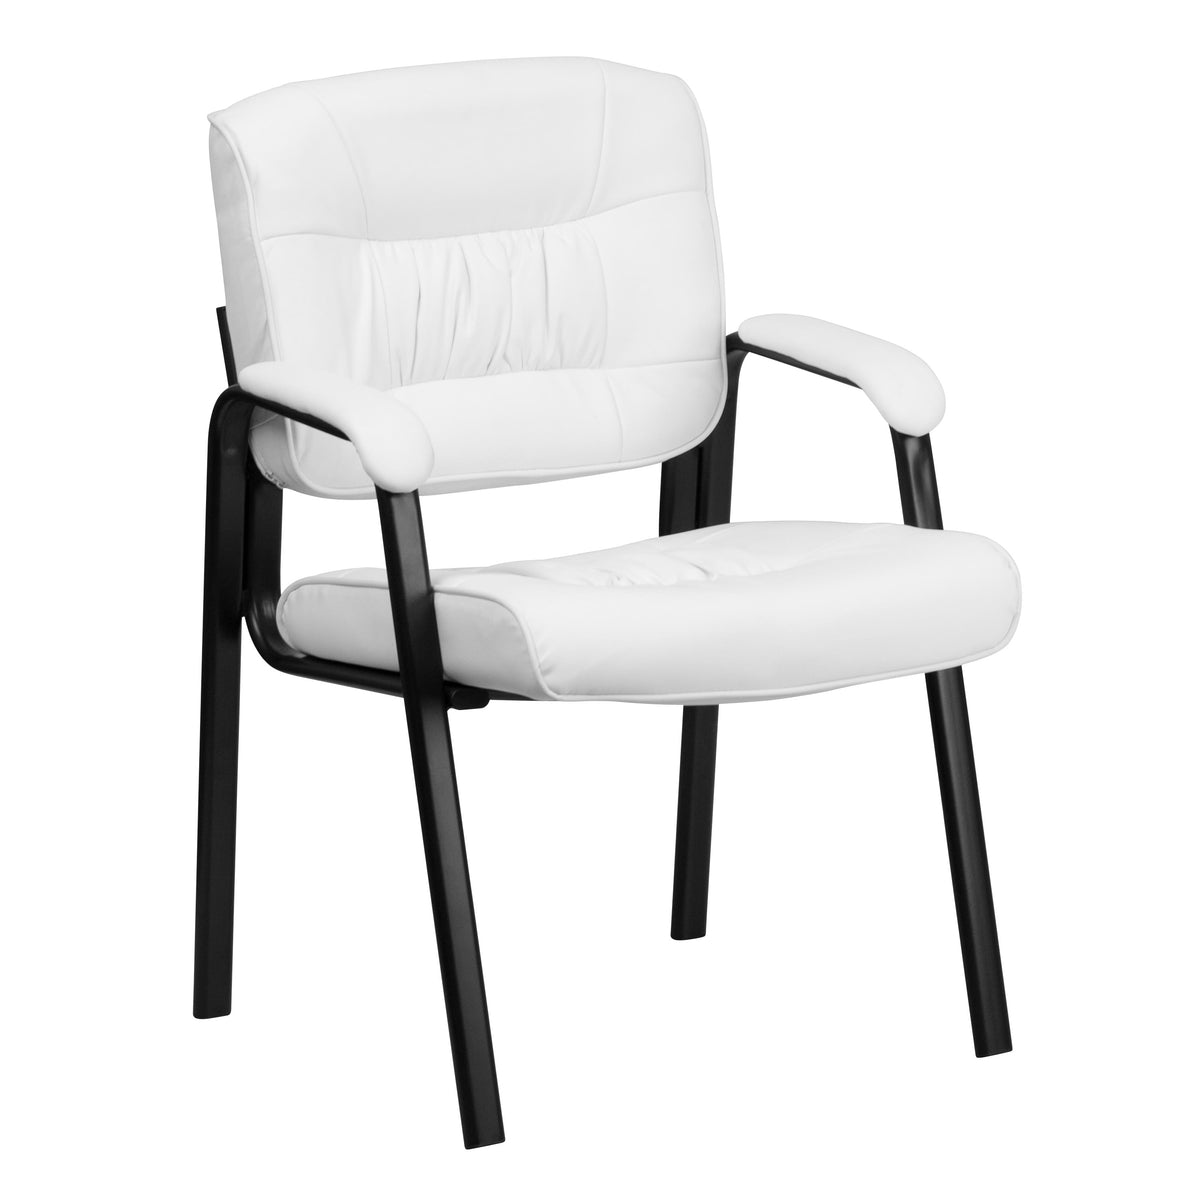 White LeatherSoft/Black Frame |#| White LeatherSoft Executive Side Reception Chair with Black Frame - Home Office